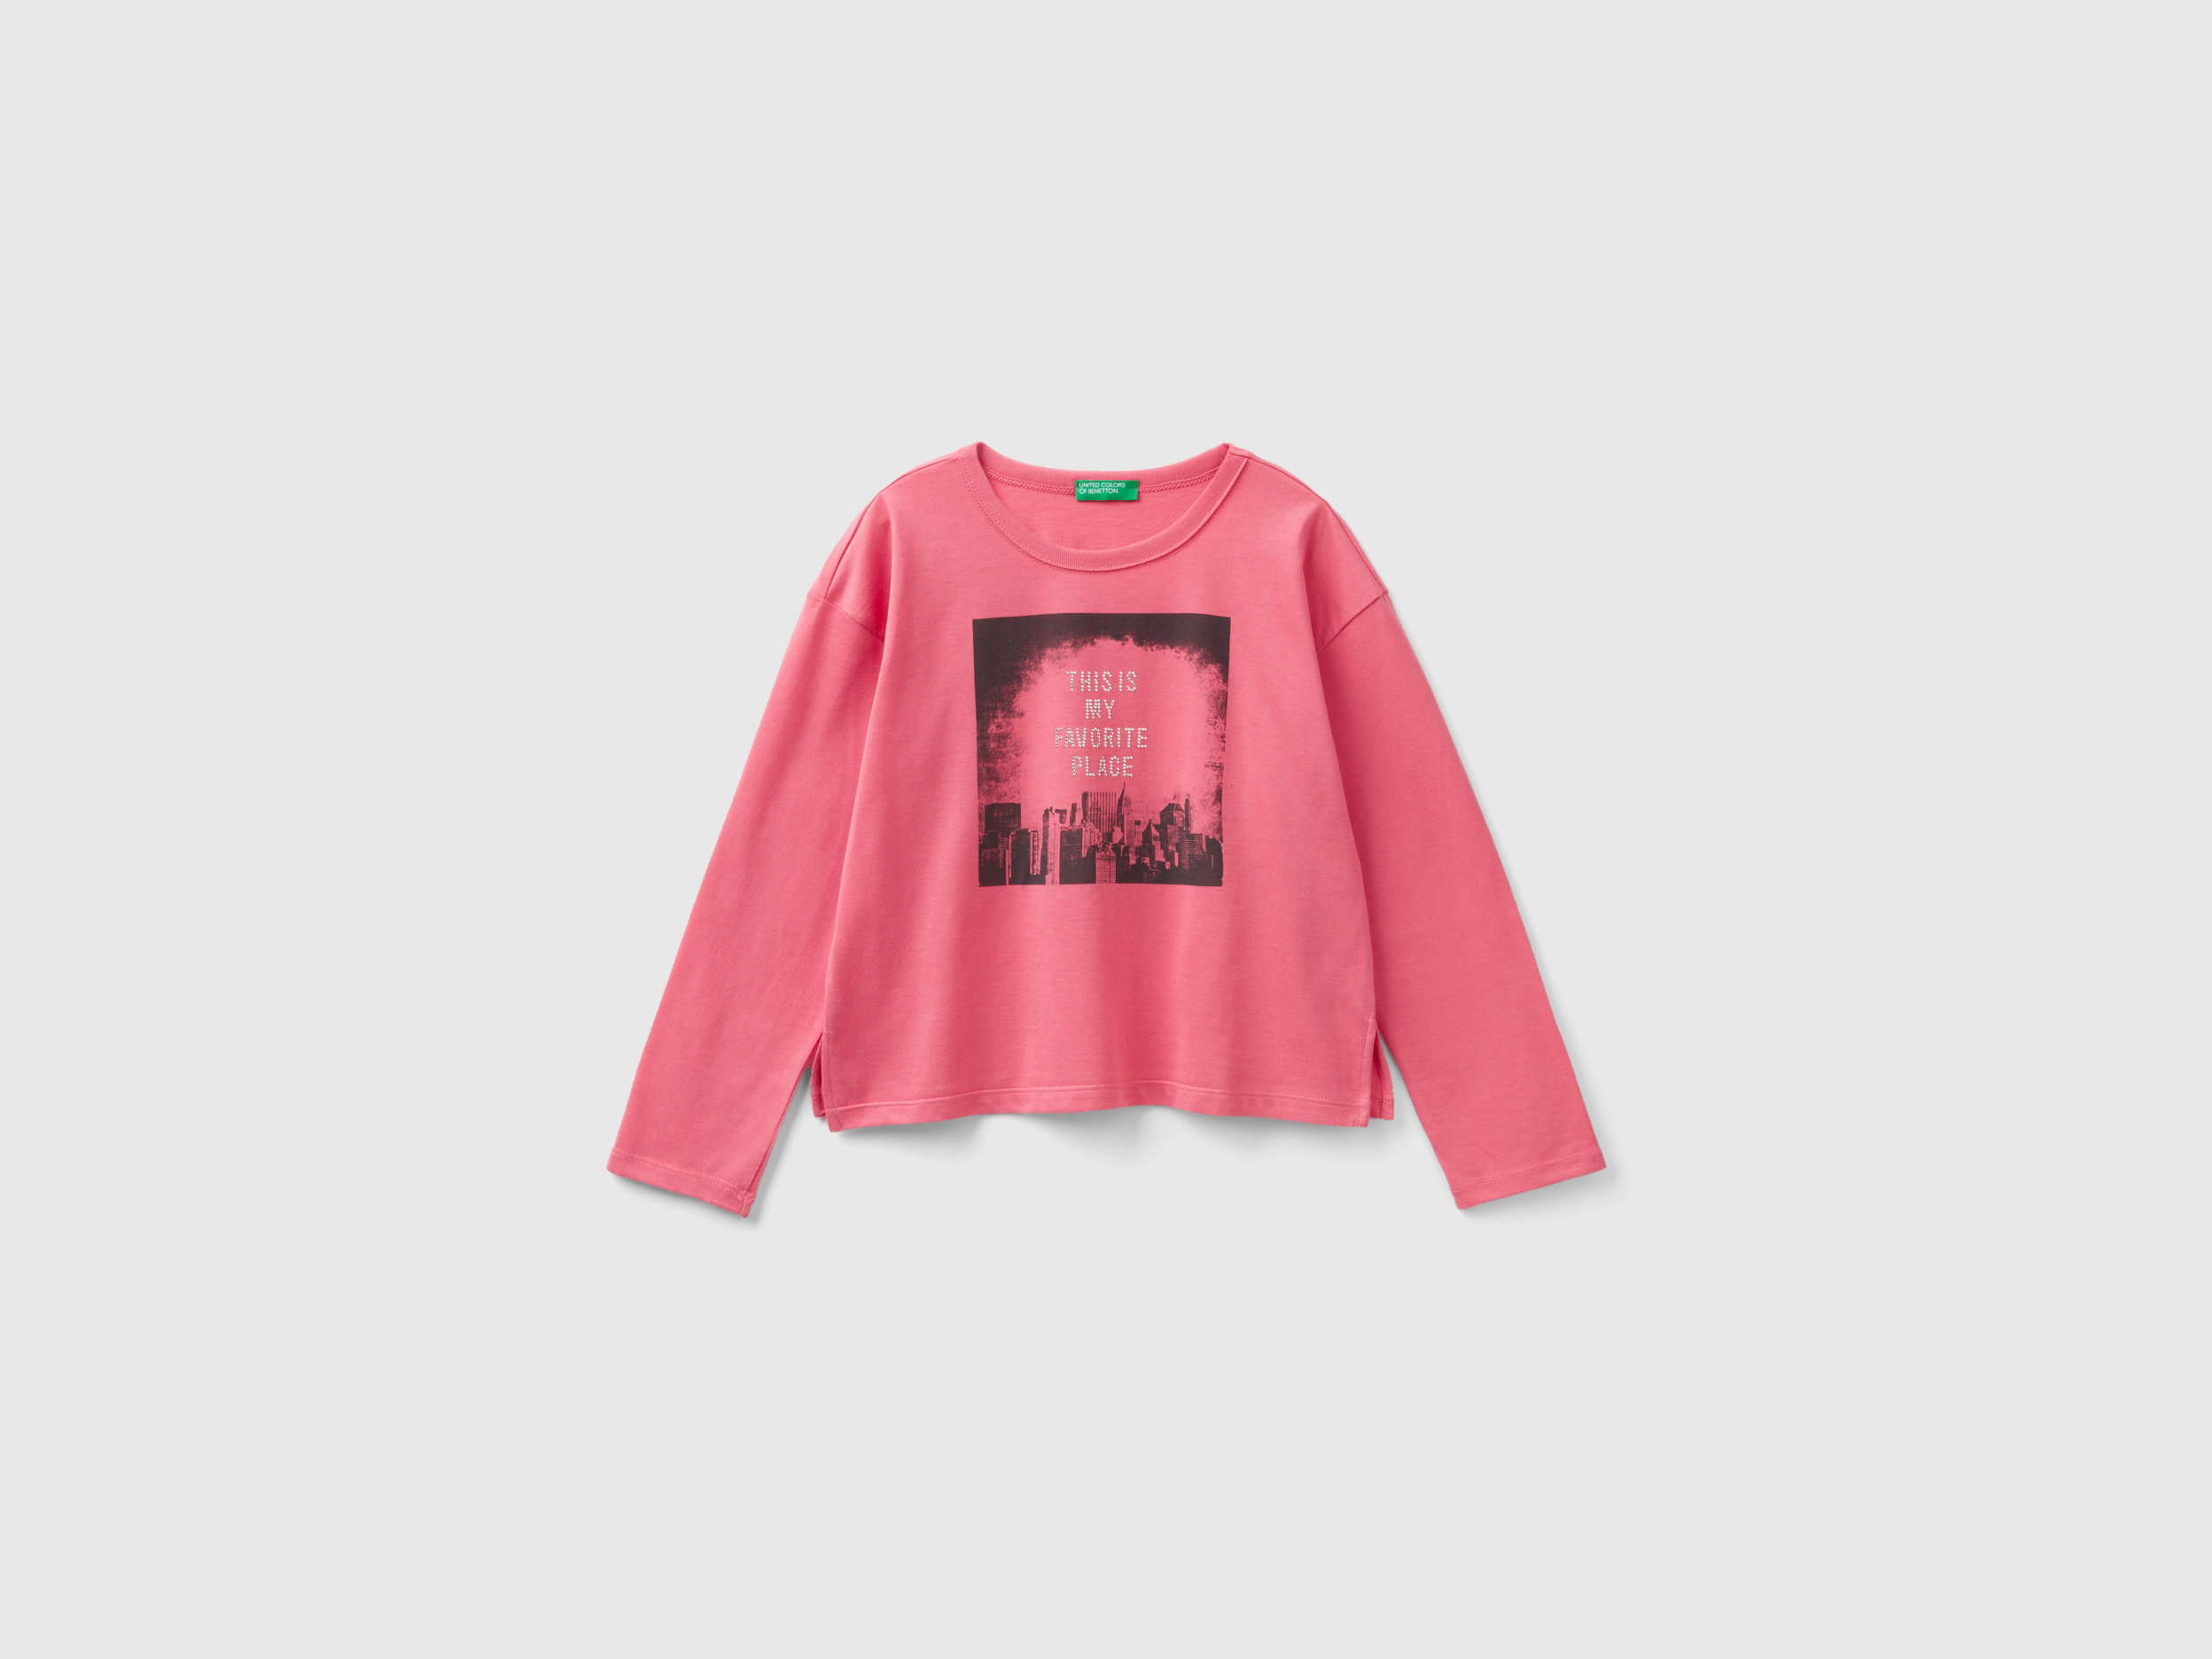 Benetton, T-shirt With Print And Studs, size 2XL, Pink, Kids